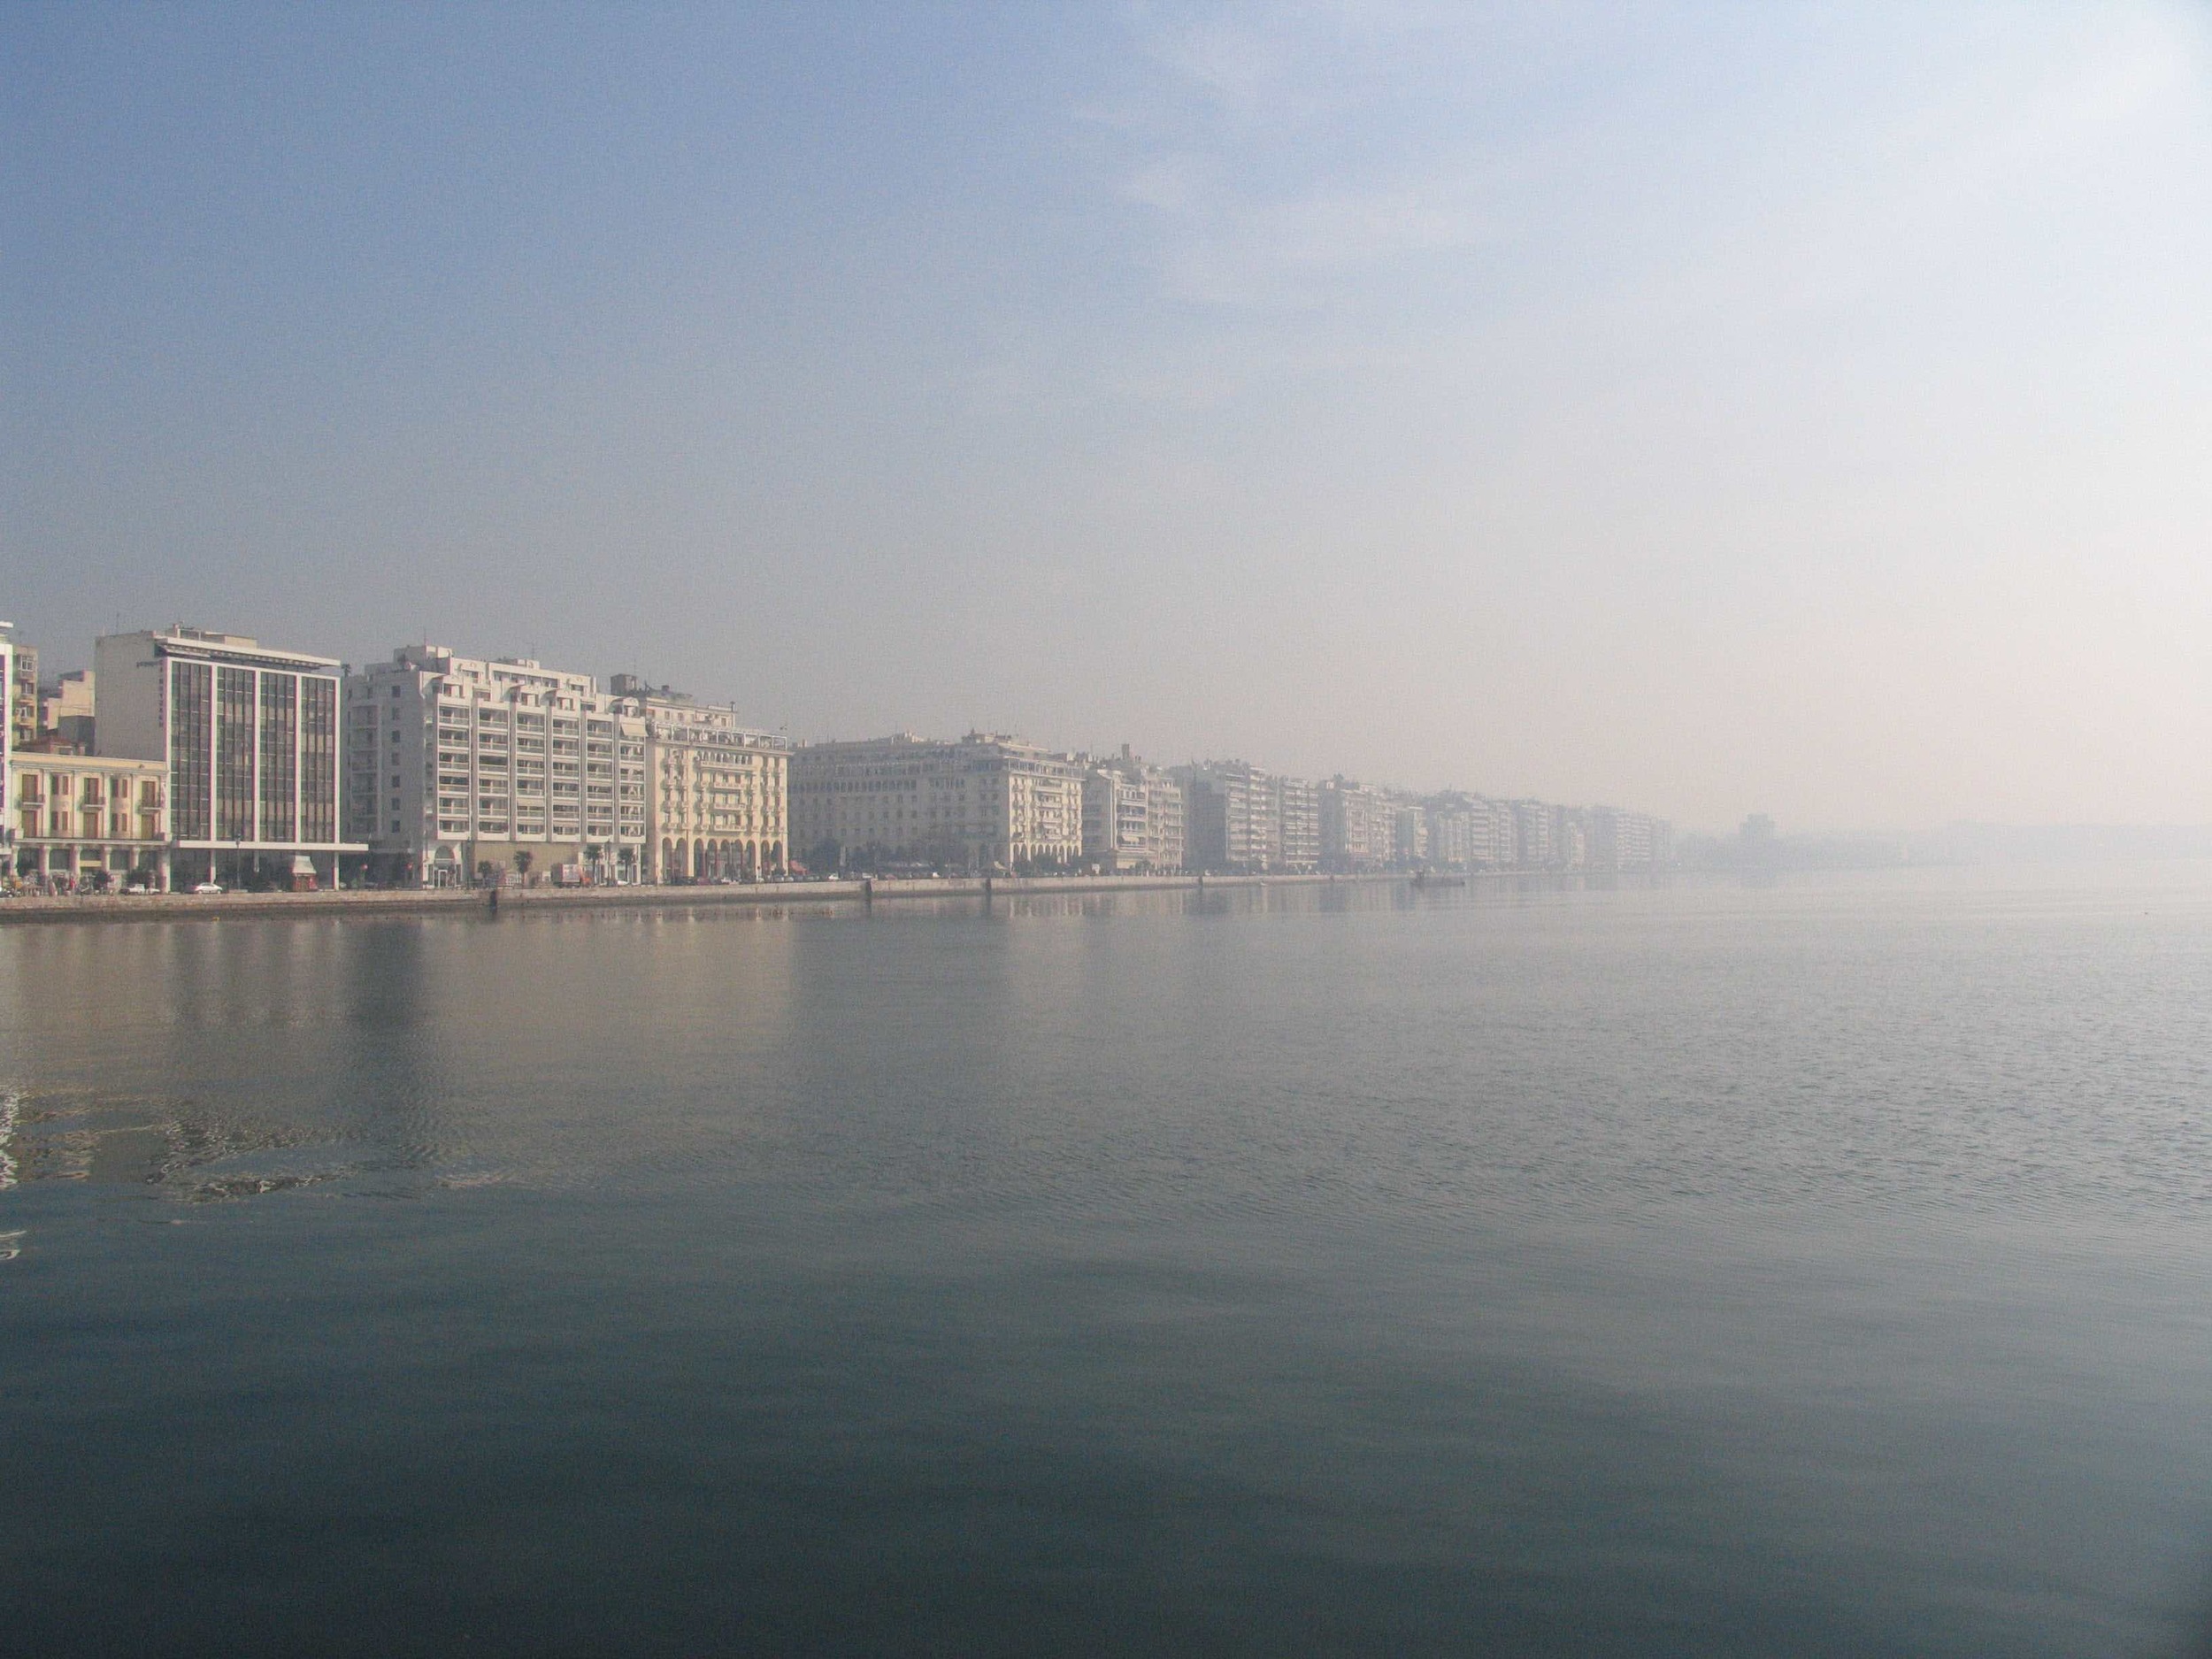 1 Salonica City from the sea.jpg